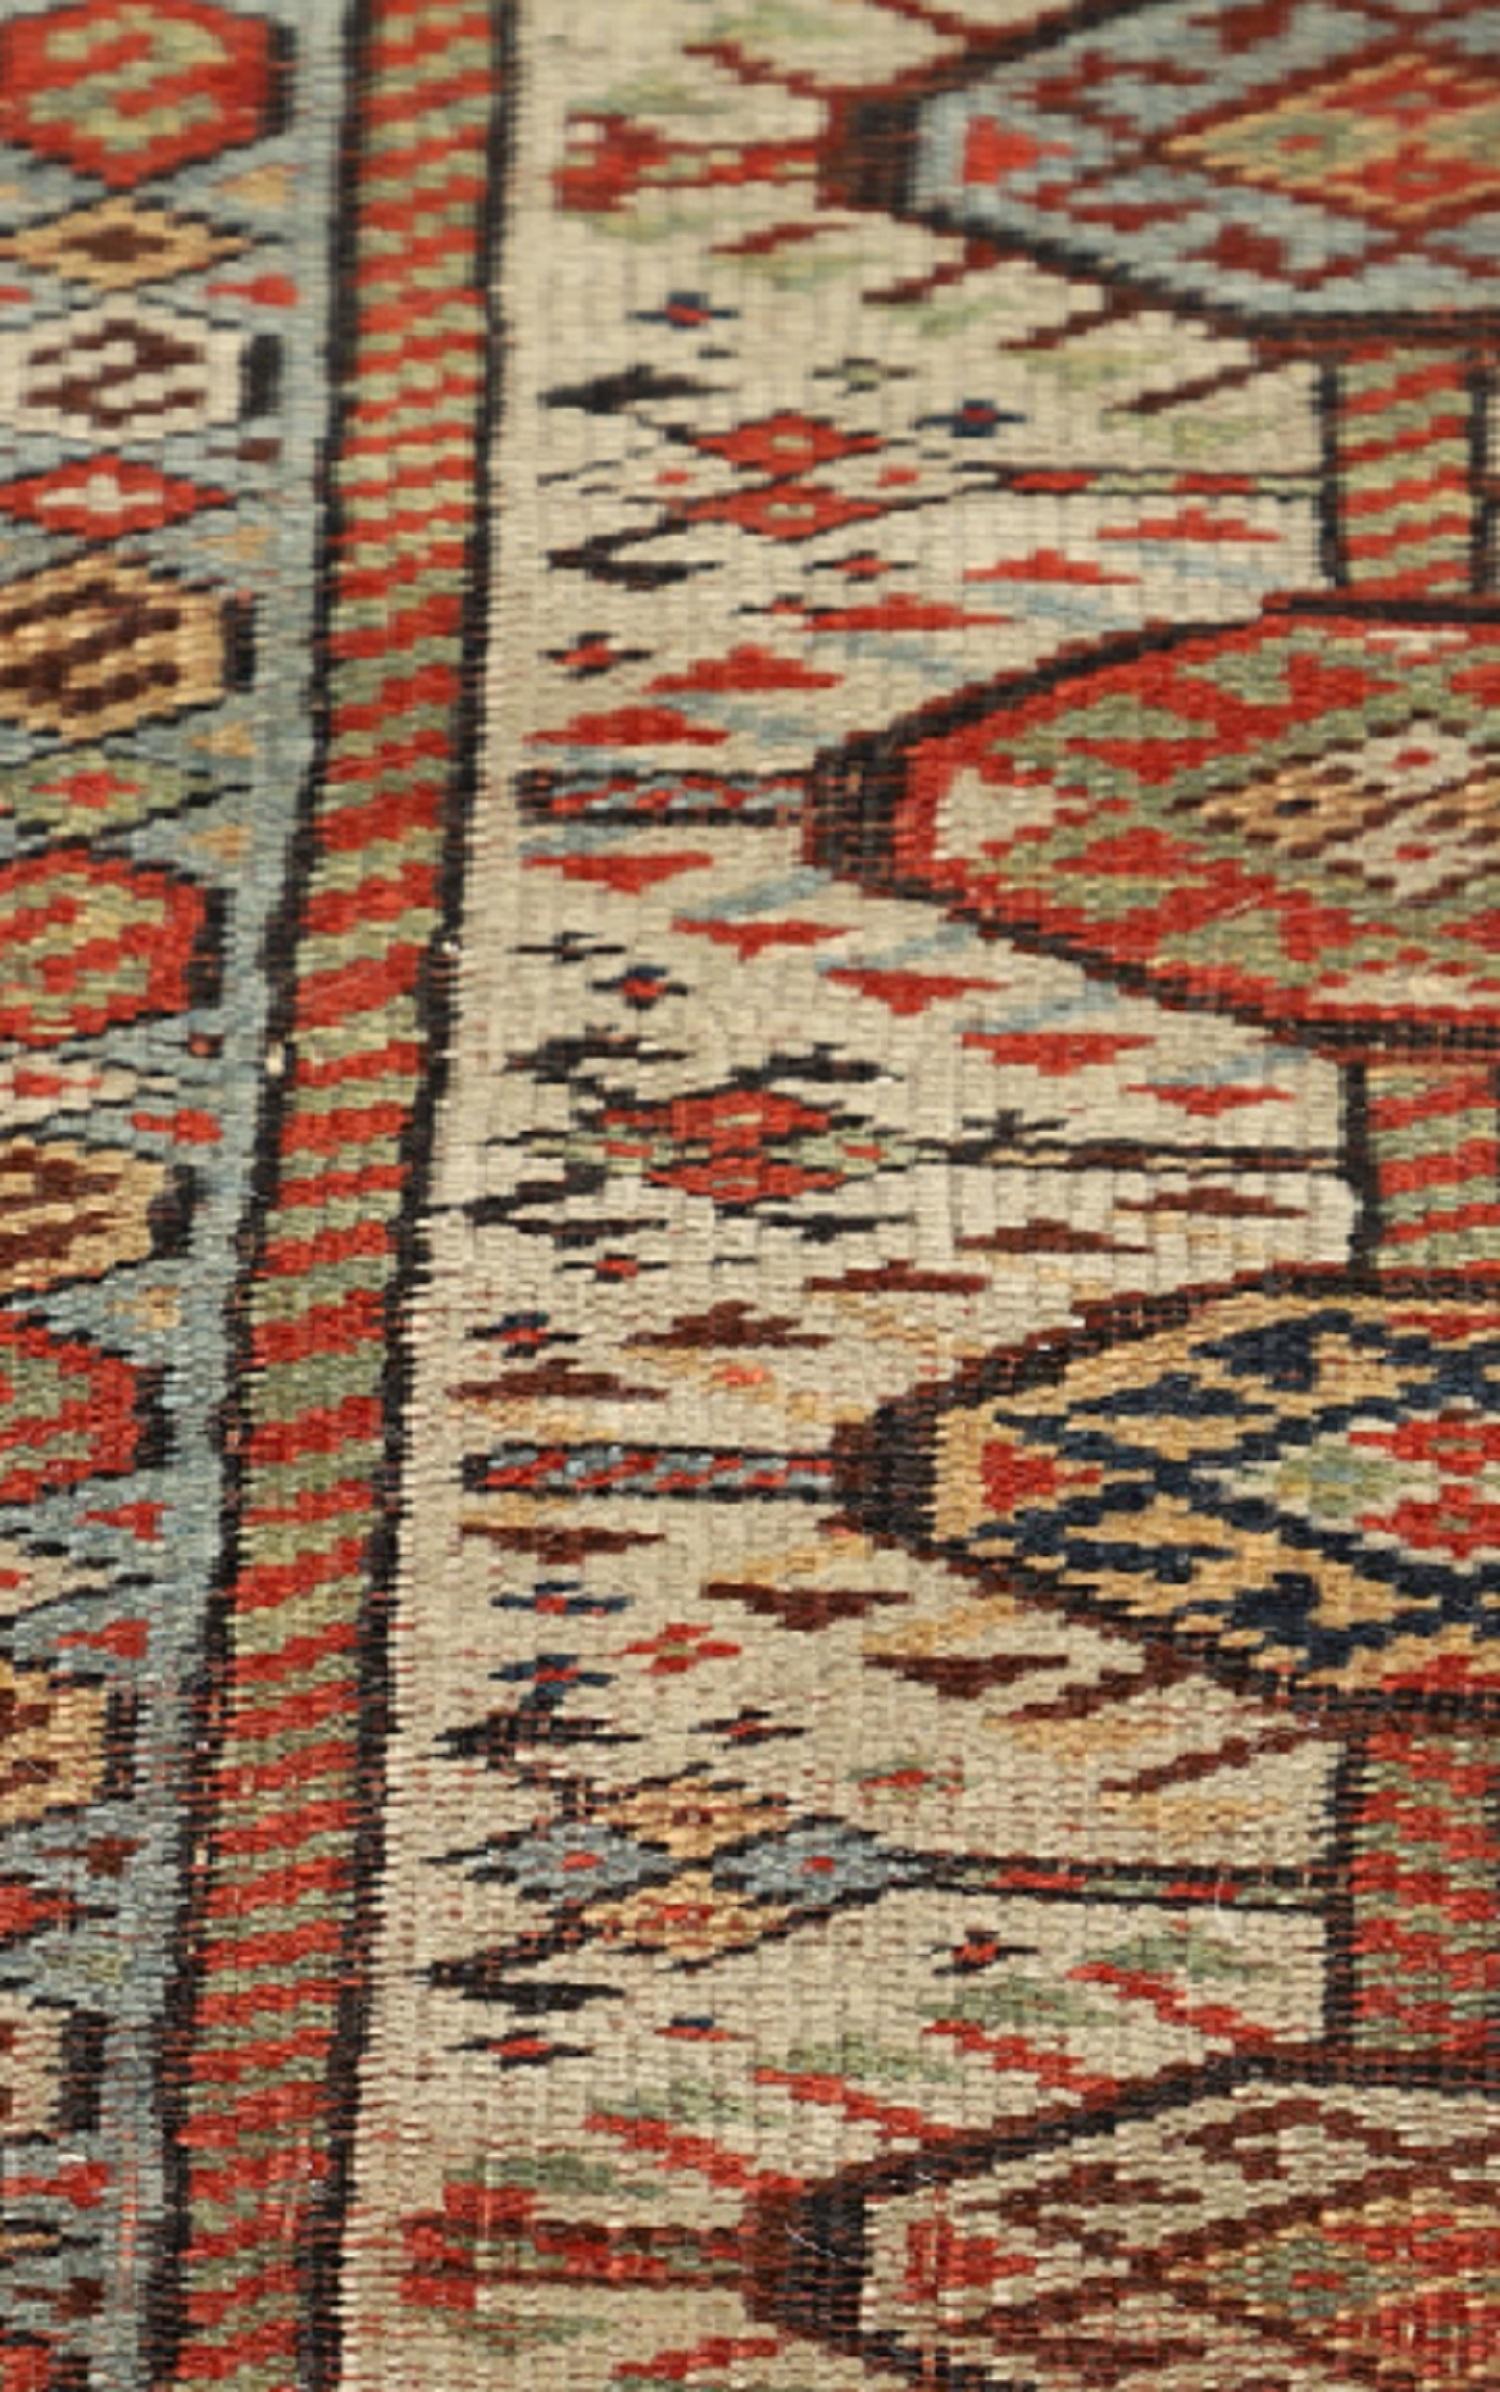 This Oriental rug originates from Azerbaijan; it has been hand-woven with hand-pun wool and dyed with 100% organic vegetable dyes. With a multi-layered border and a symmetrical pattern, this rug will stand out against any hardwood floor. The